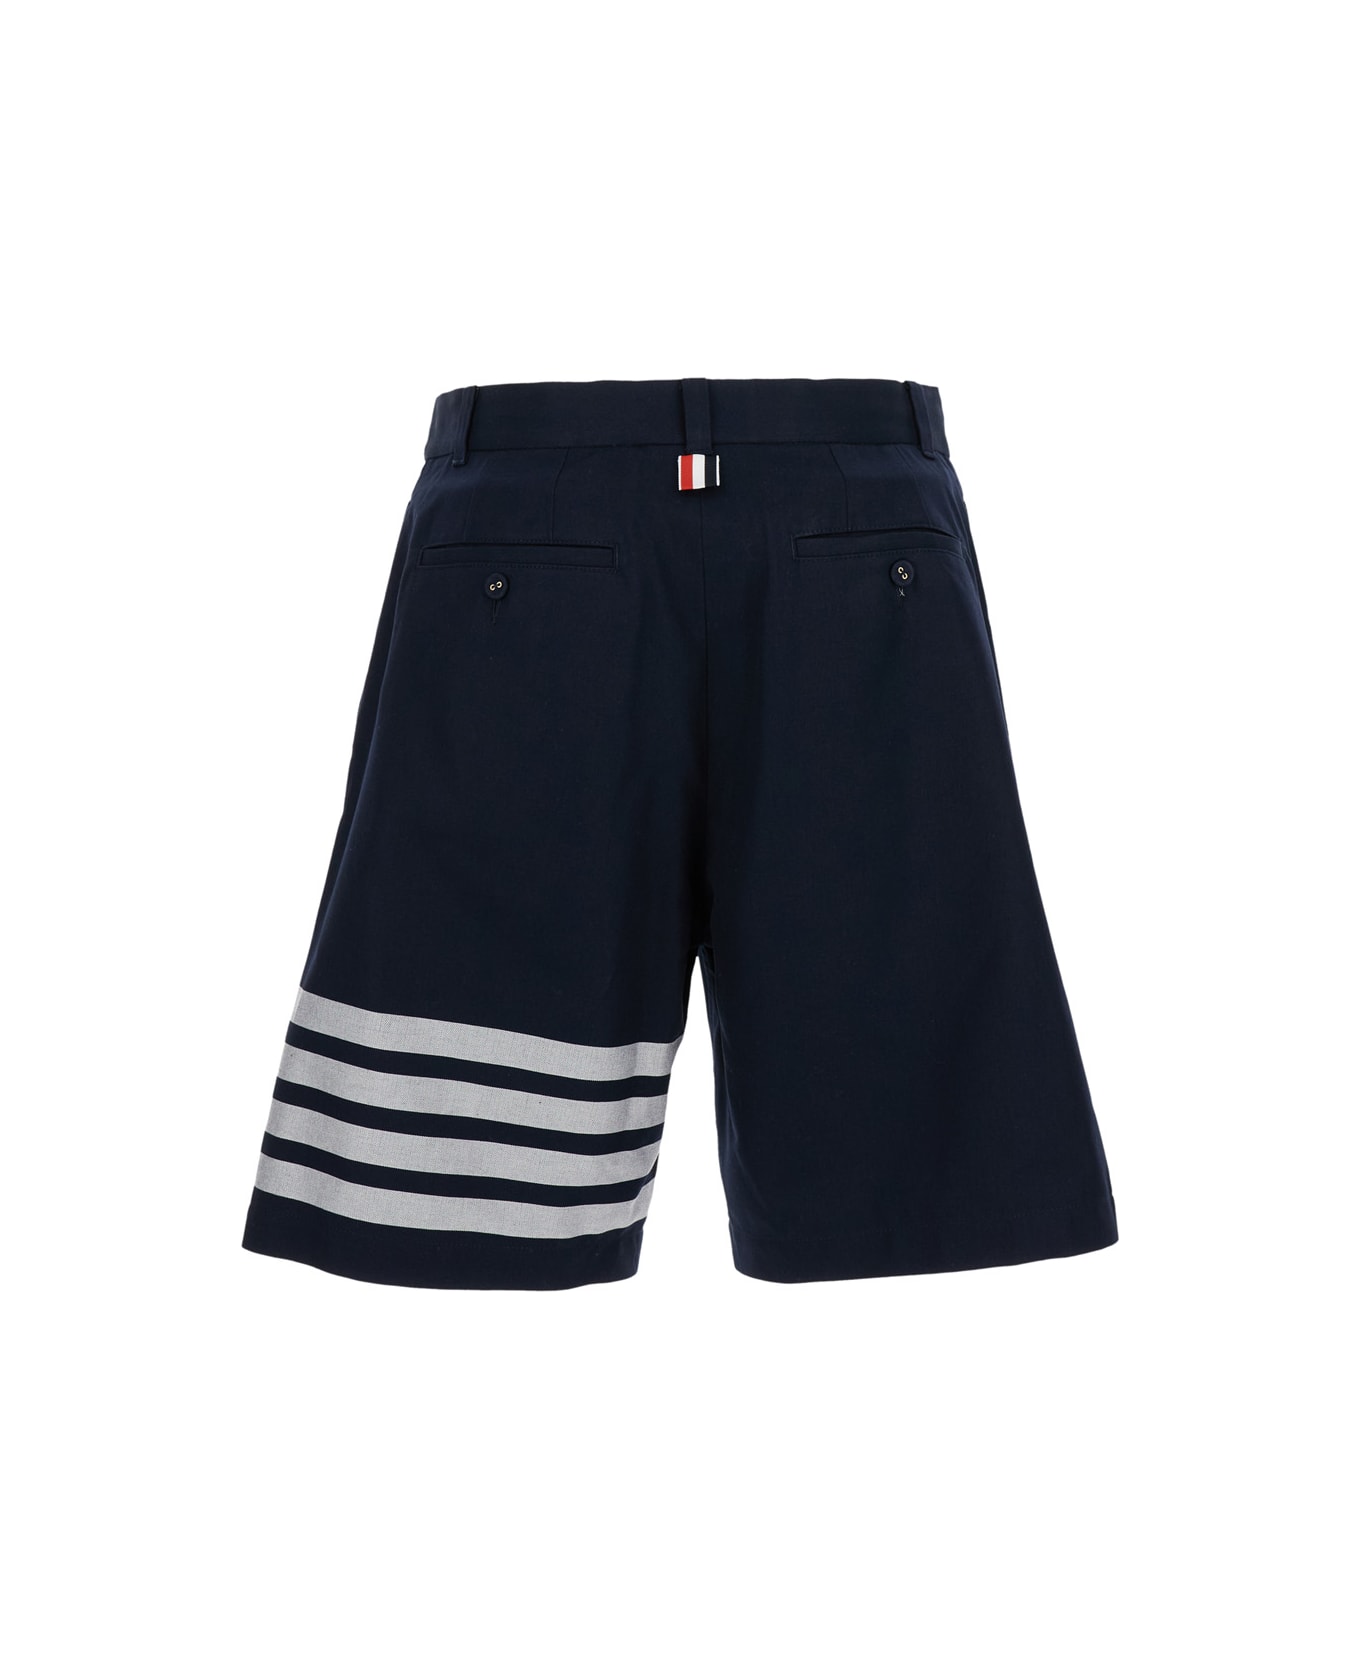 Thom Browne Unconstructed Straight Leg Double Welt Pocket Short In Engineered 4 Bar Cotton Suiting - Blu